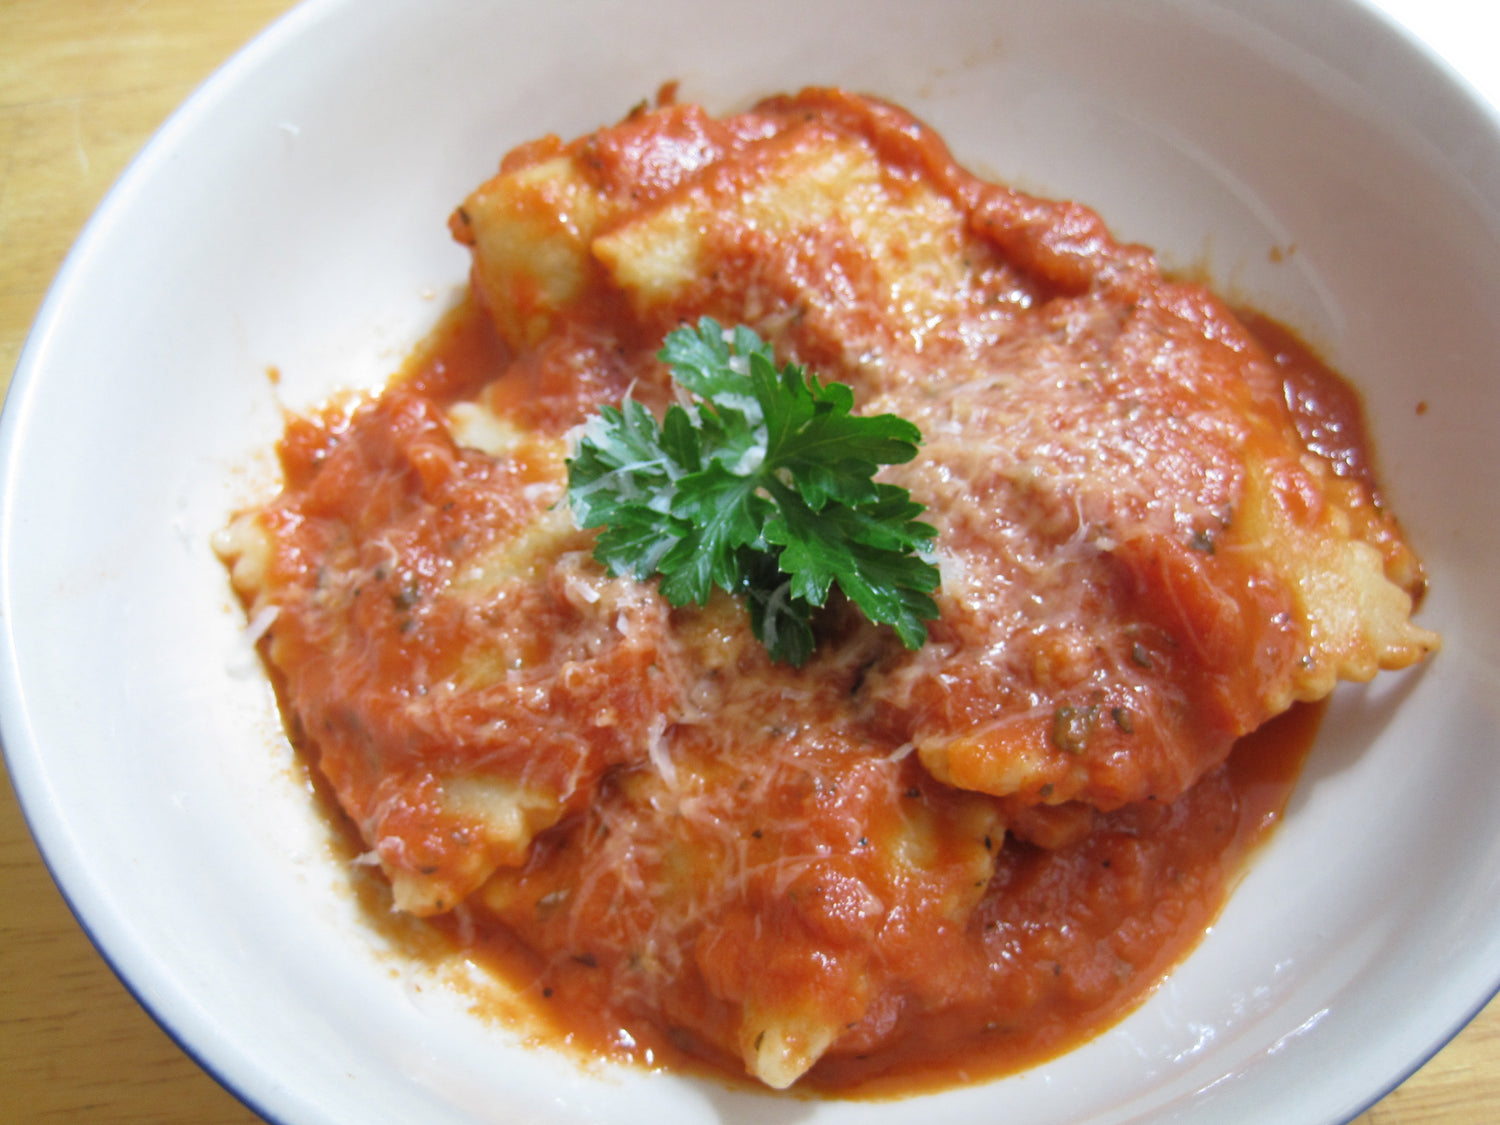 Raviolis and other dishes